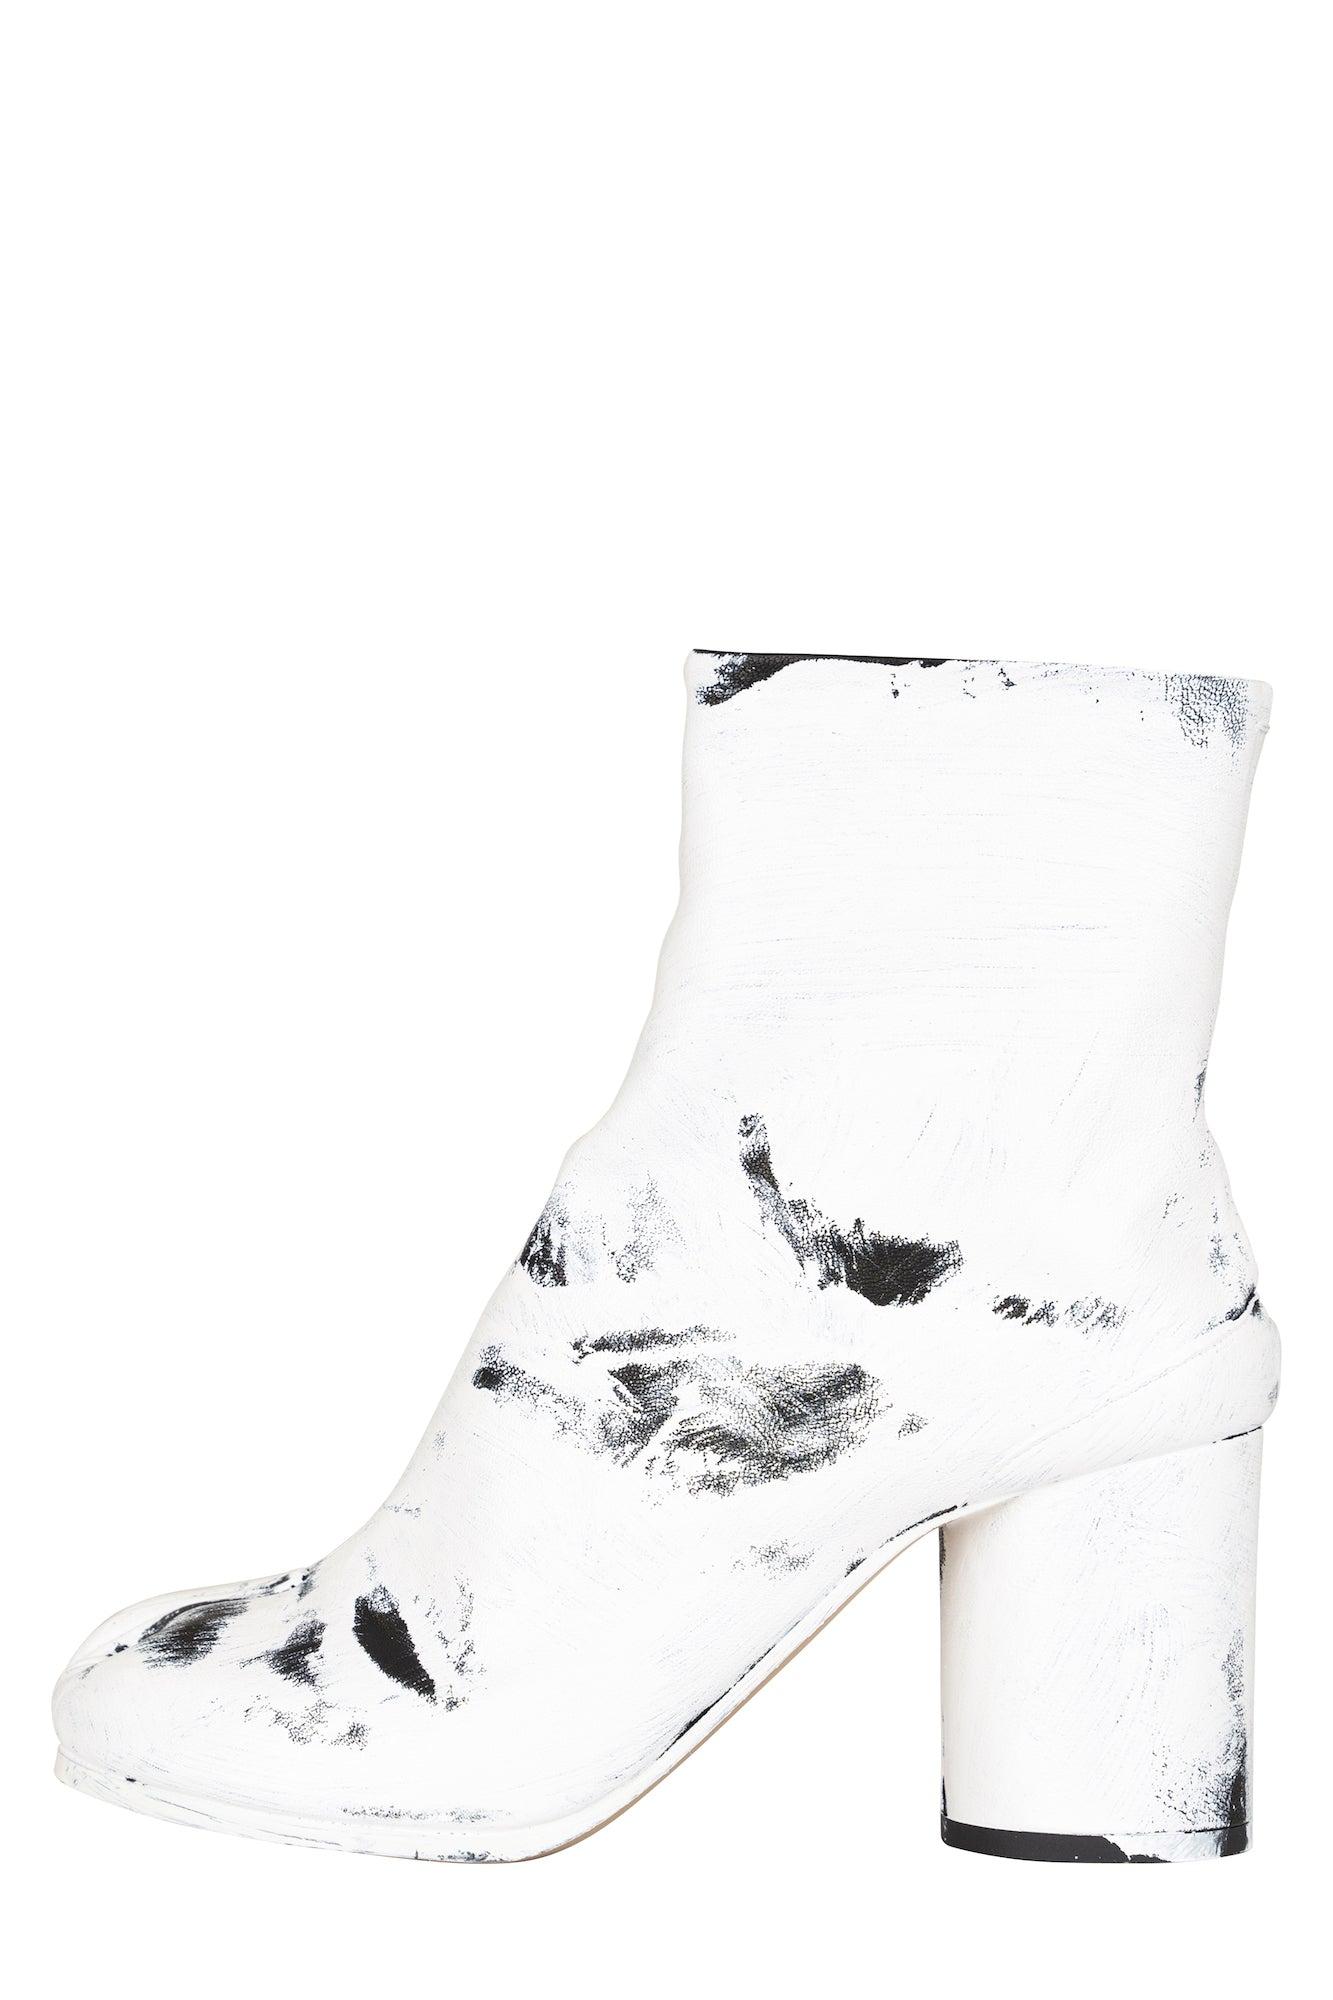 Maison Margiela Painted Tabi Boots H80 in White | Lyst